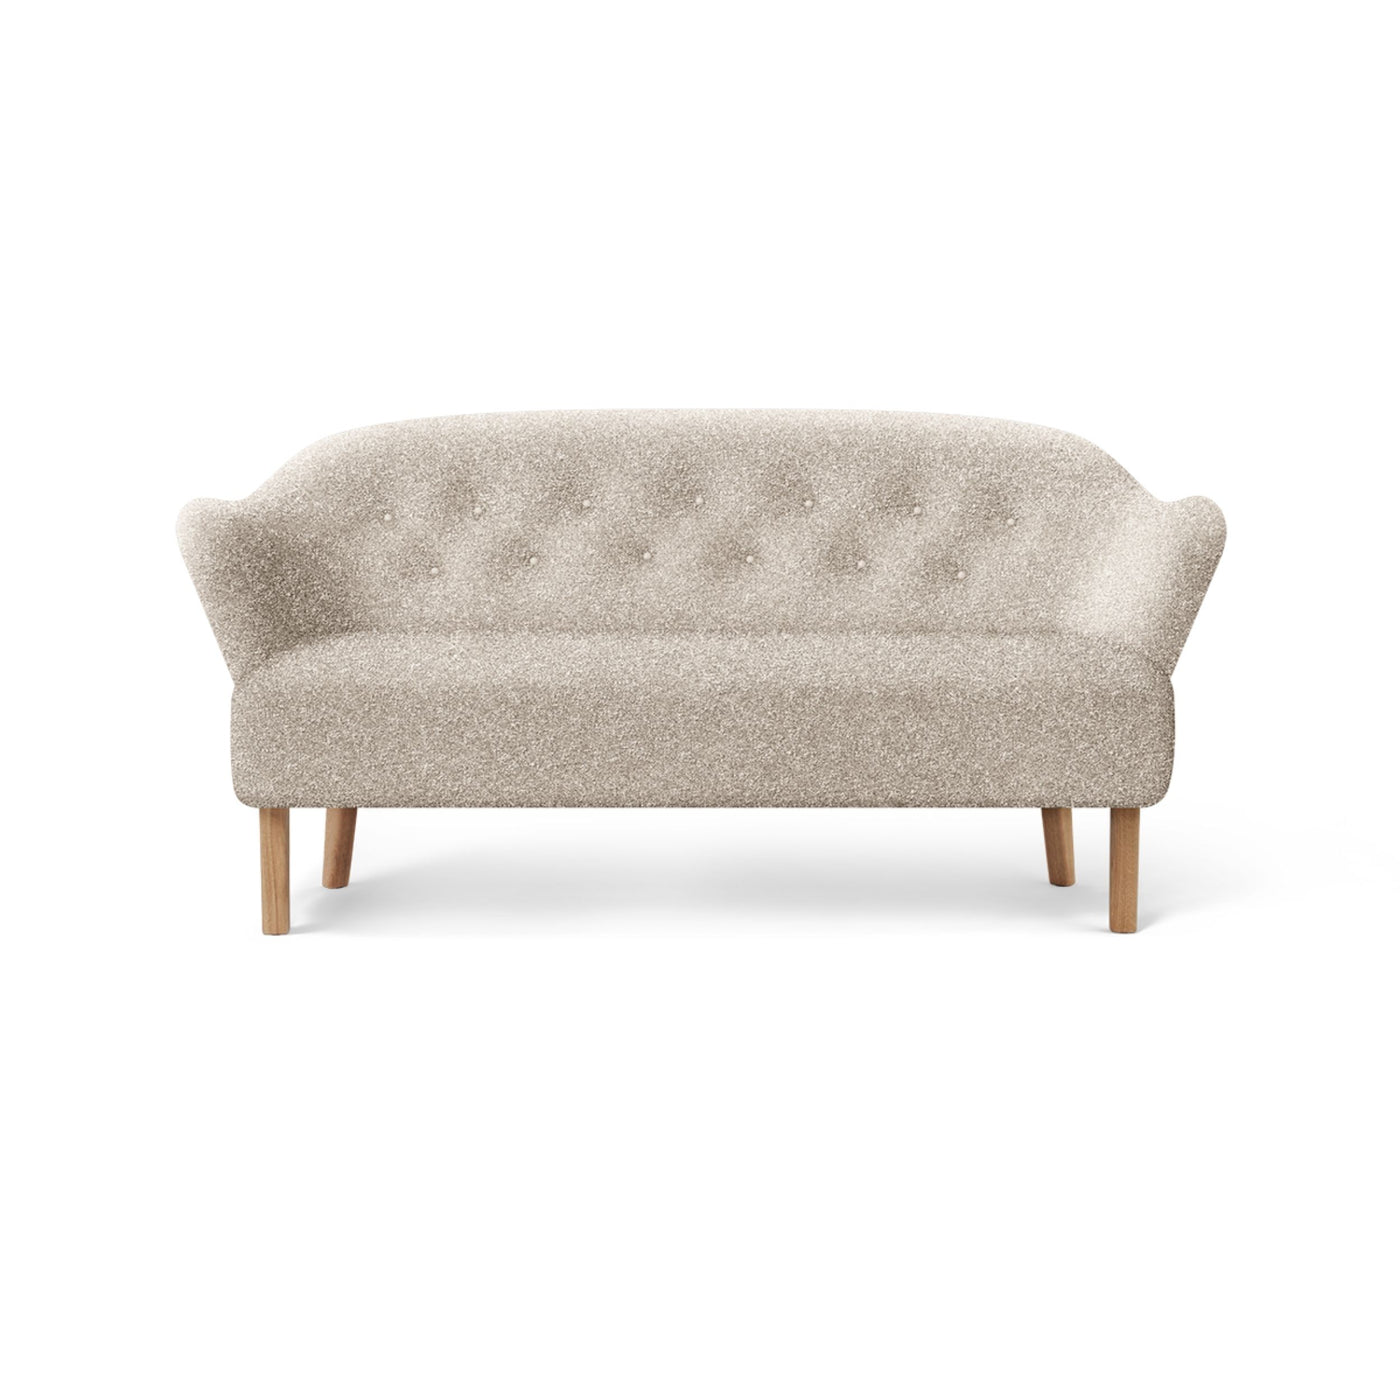 By Lassen Ingeborg sofa with natural oak legs. Made to order from someday designs. #colour_sahco-zero-16